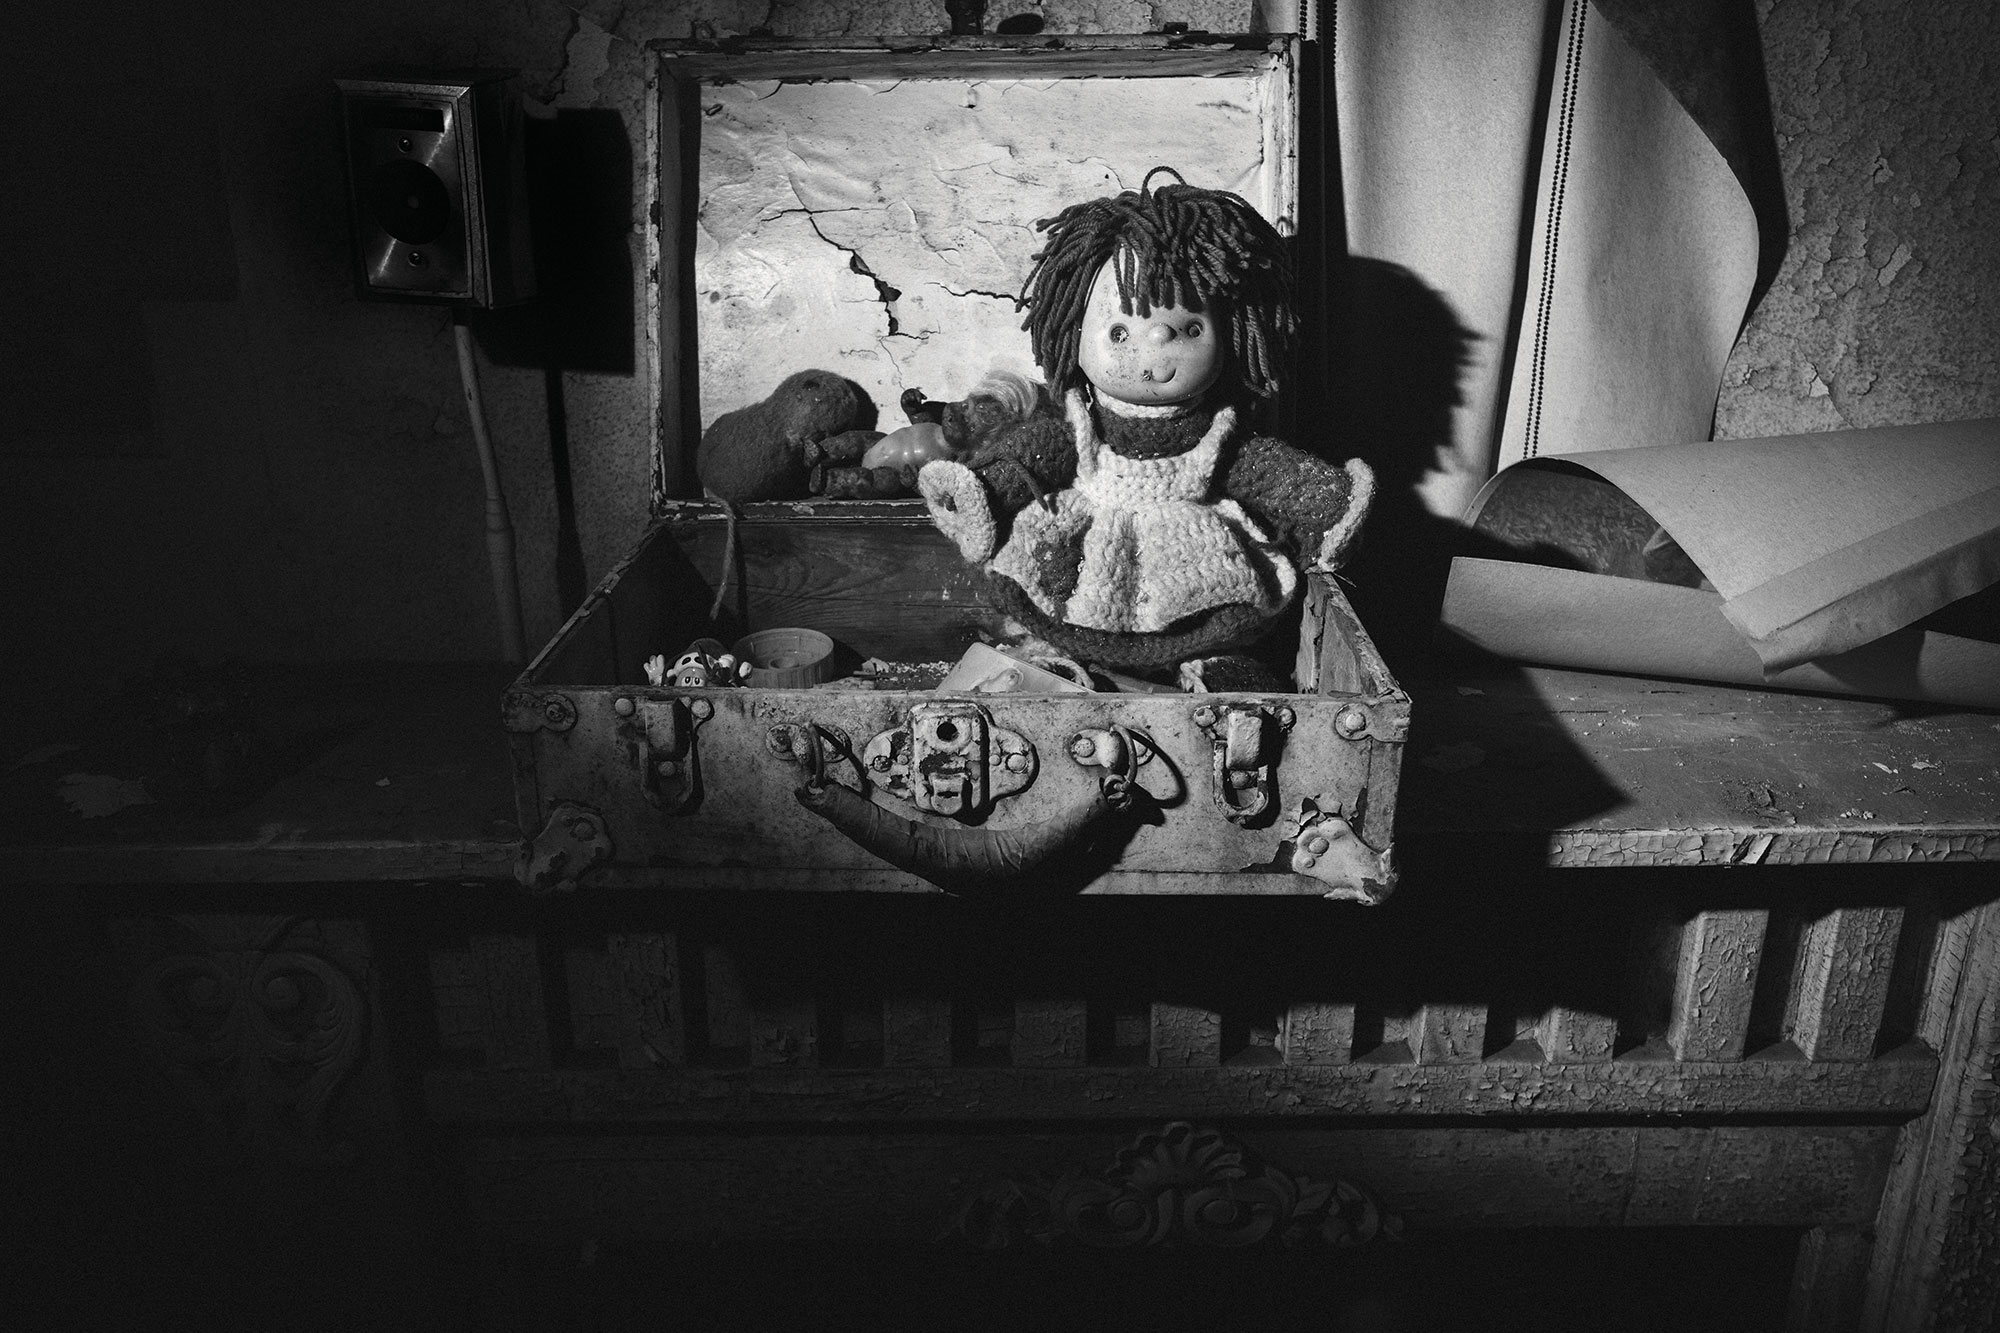 This high-contrast black and white photograph shows a creepy old-fashioned doll sitting on a mantle